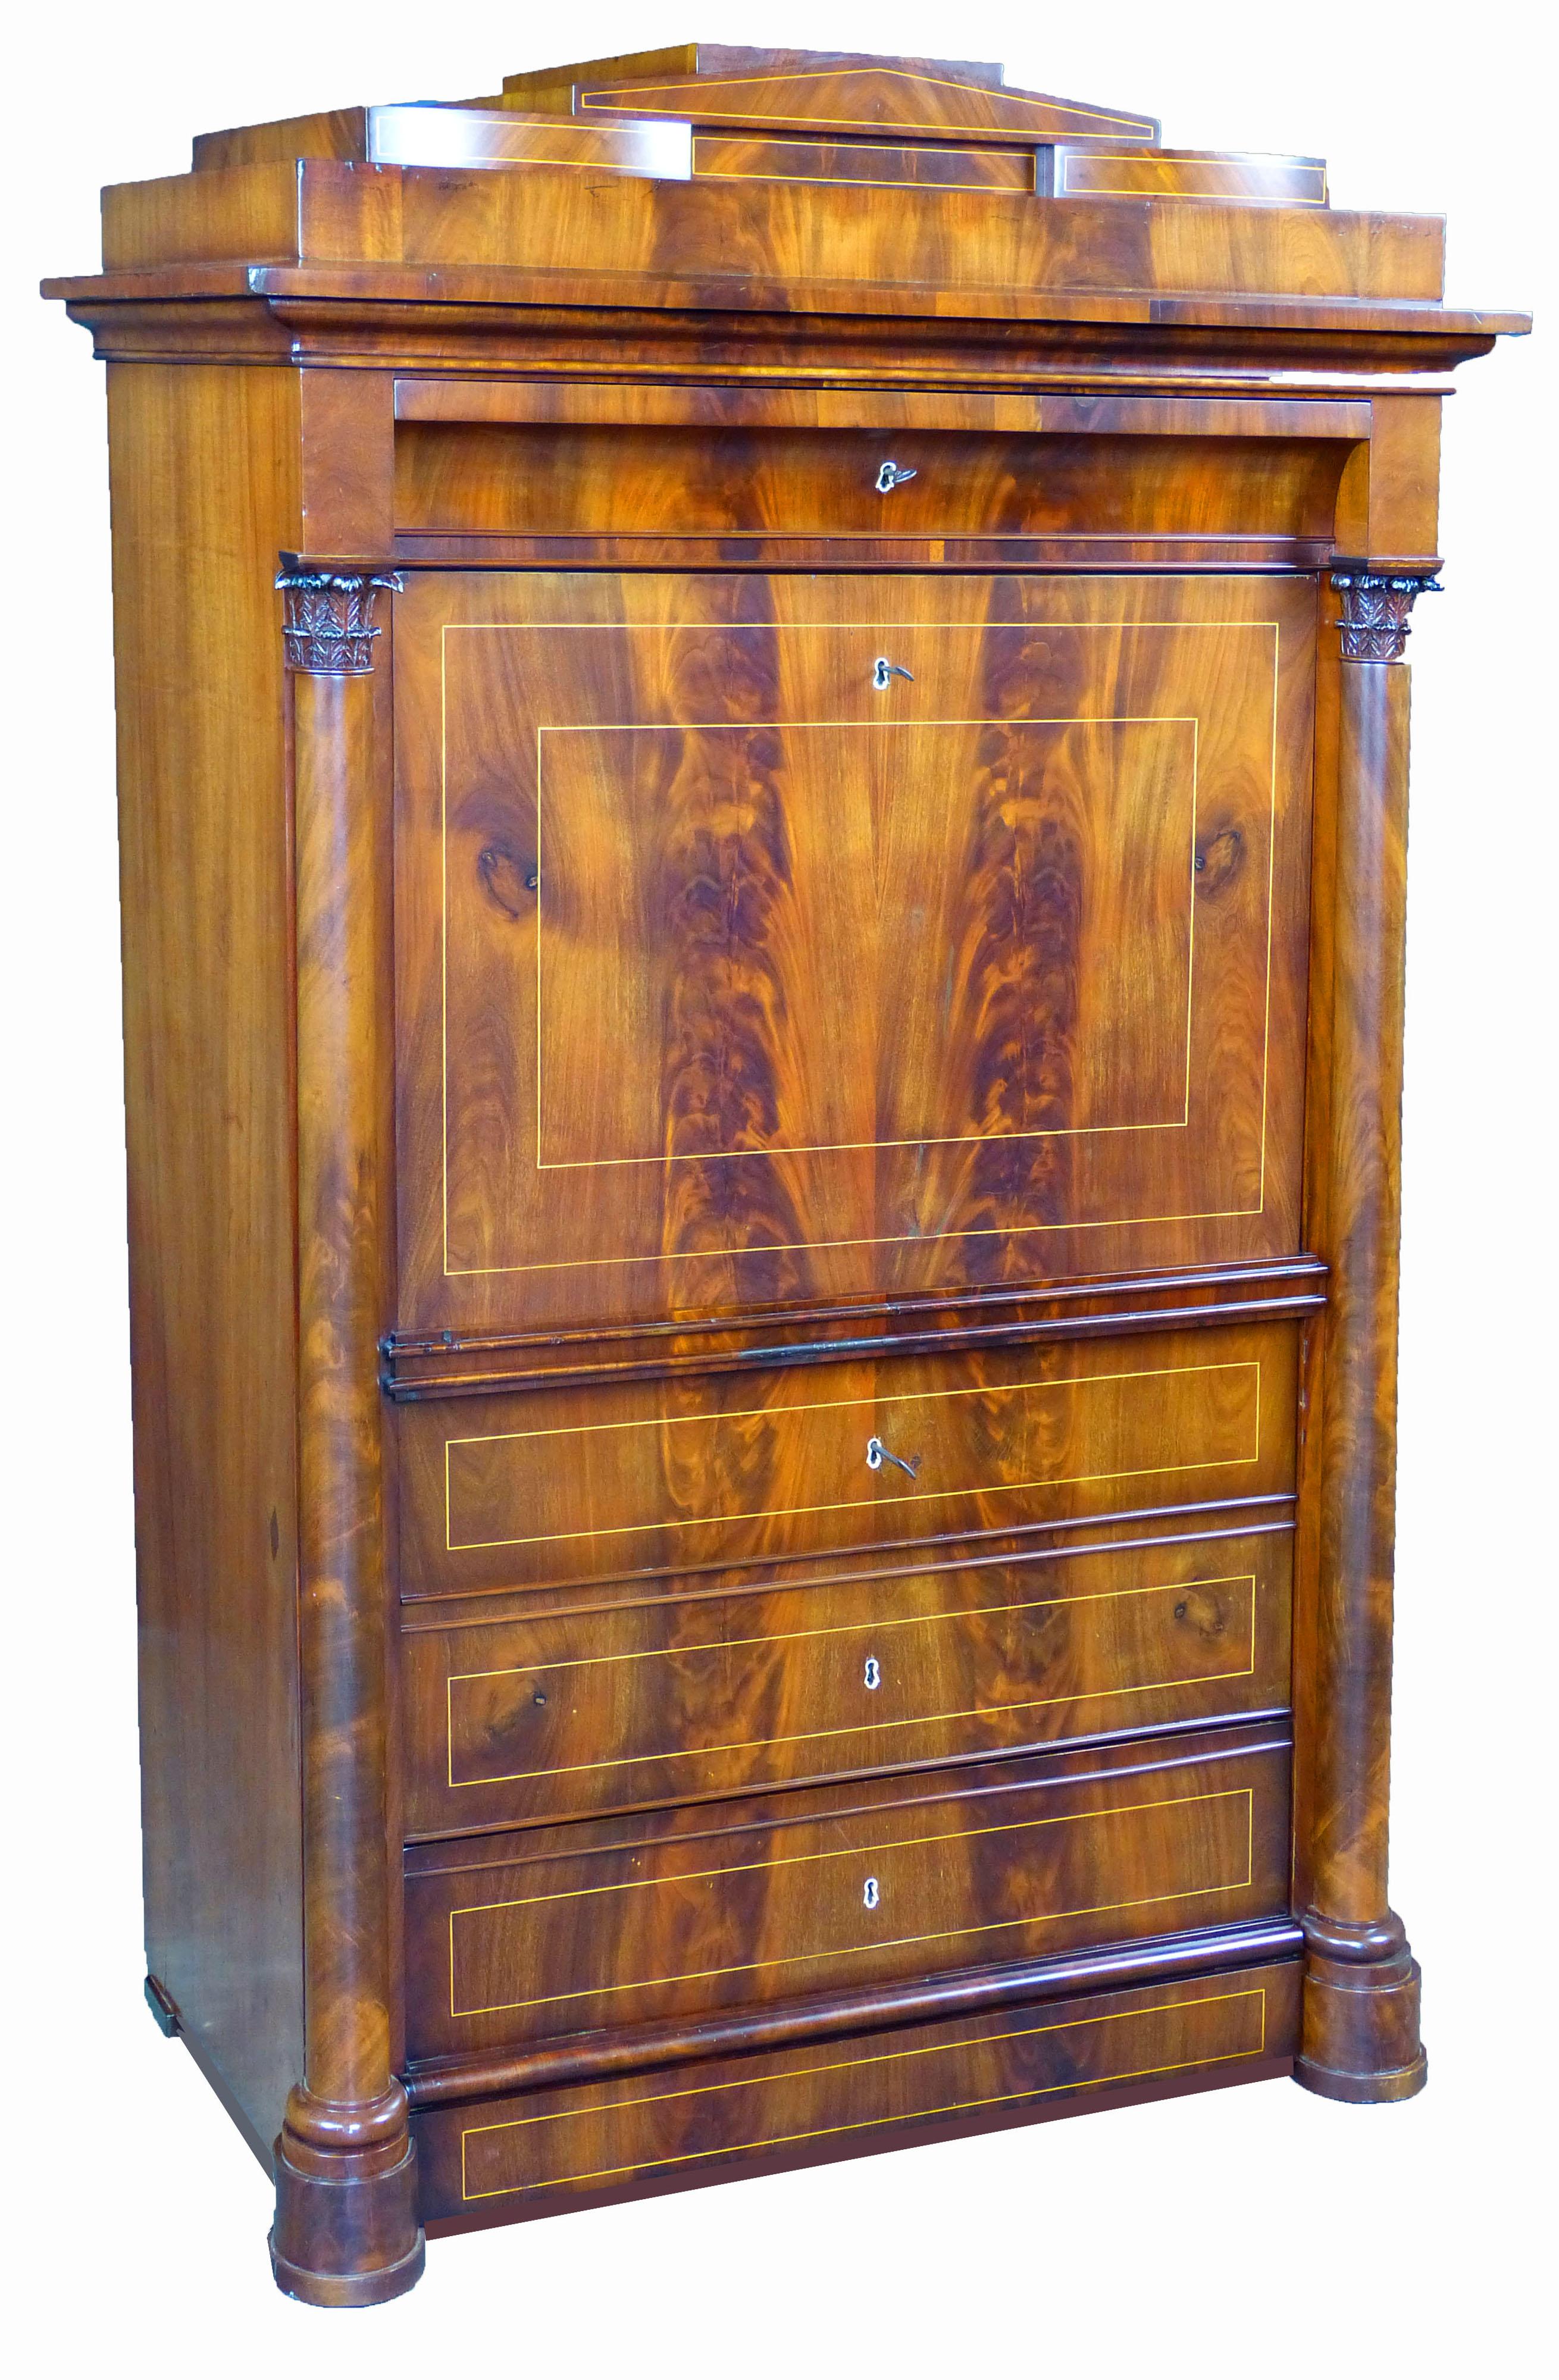 Danish Biedermeier secretaire a abattant dating to the beginning of the 19th century, featuring masterfully matched figured mahogany, line inlaid throughout and frontal columns with carved mahogany Corinthian style tops. The complex architectural